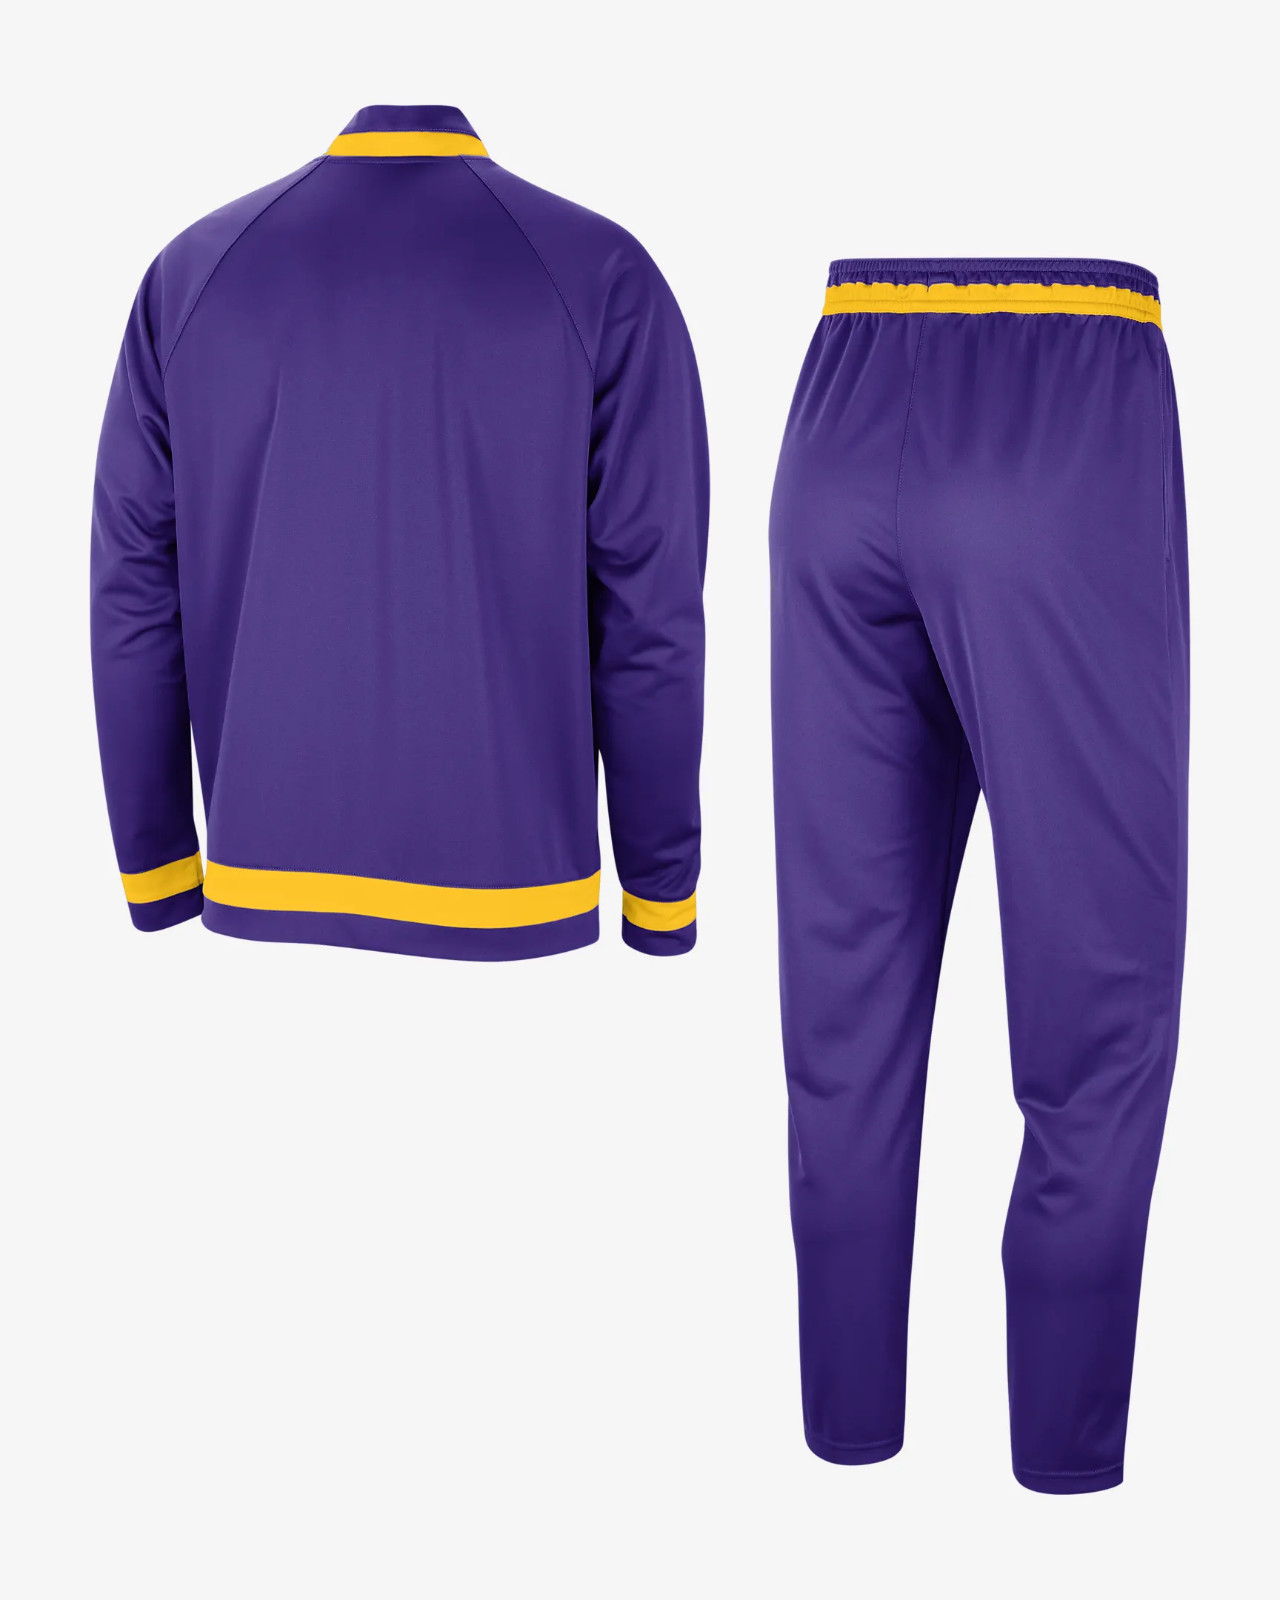 Nike 23-24 LA Lakers Starting 5 Tracksuit & Practice Jerseys Unveiled